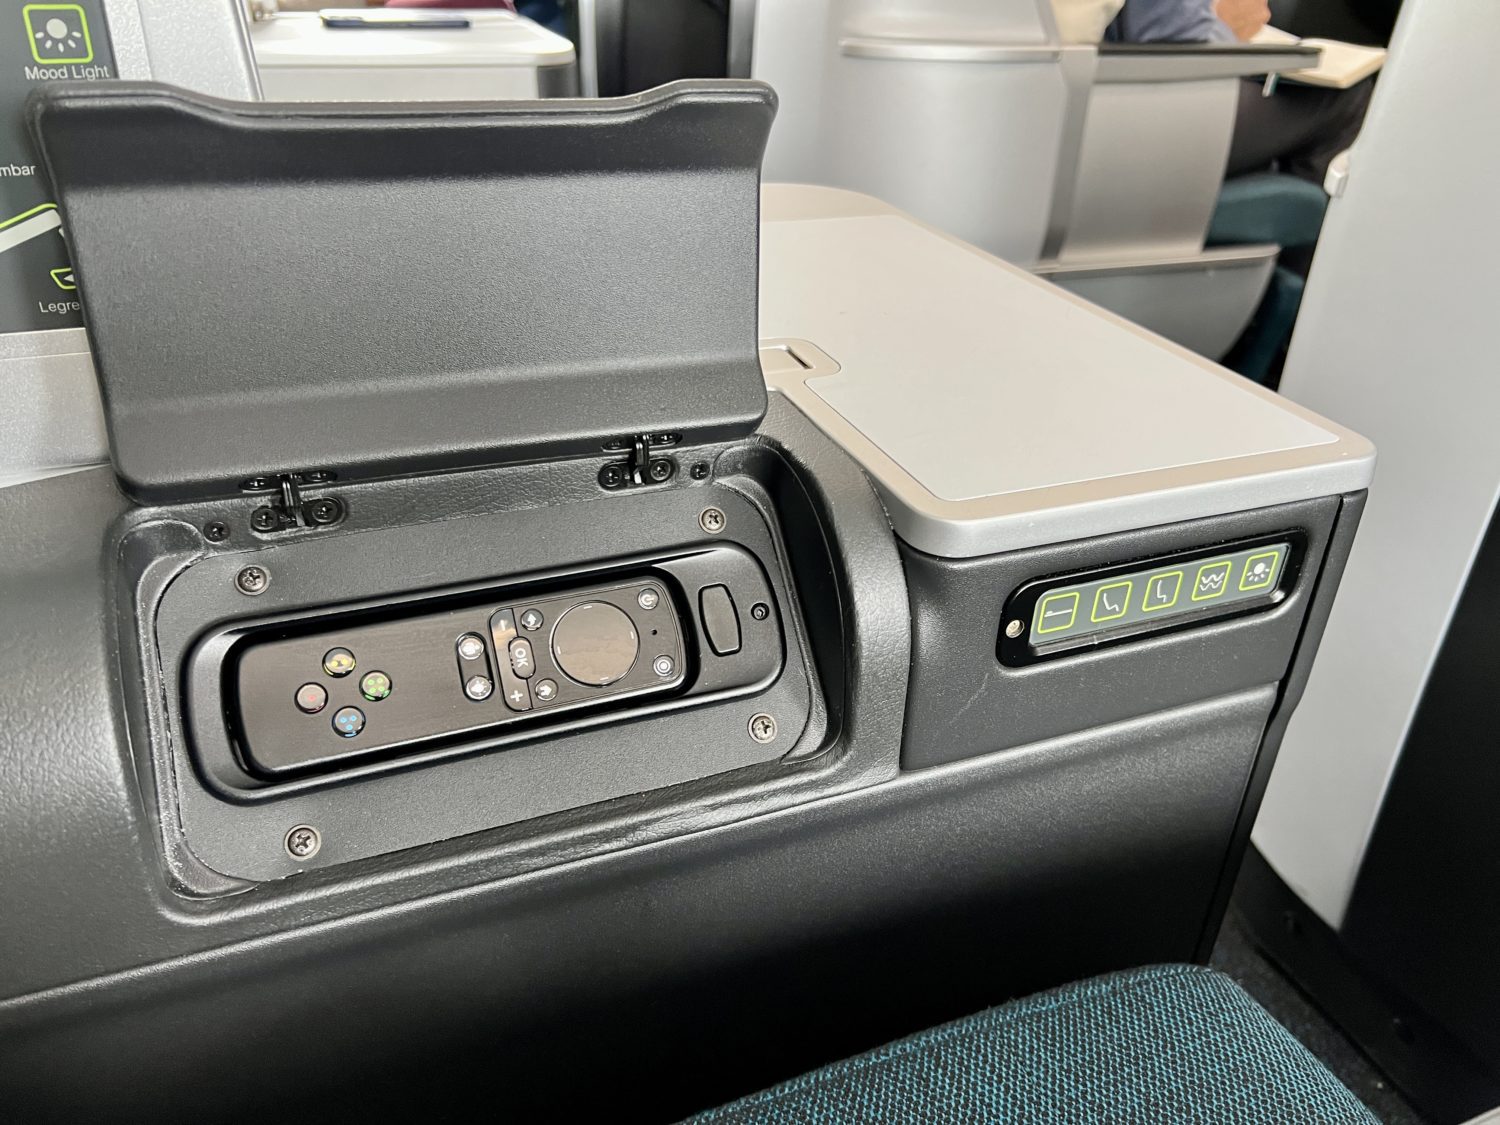 aer lingus business class seat